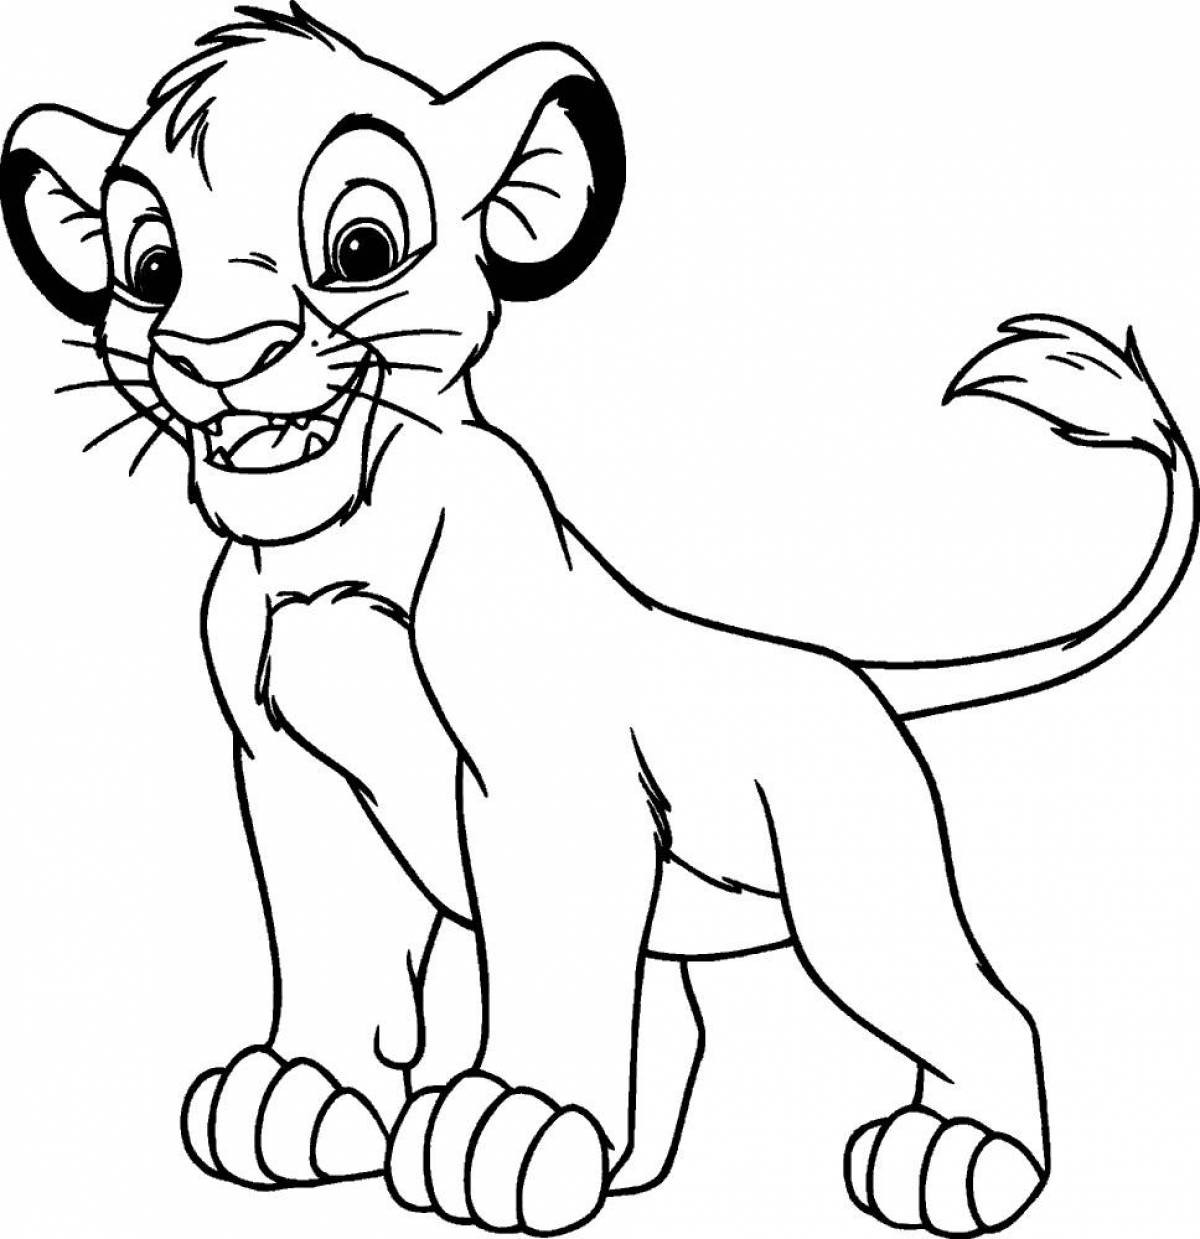 Playful encanto coloring page